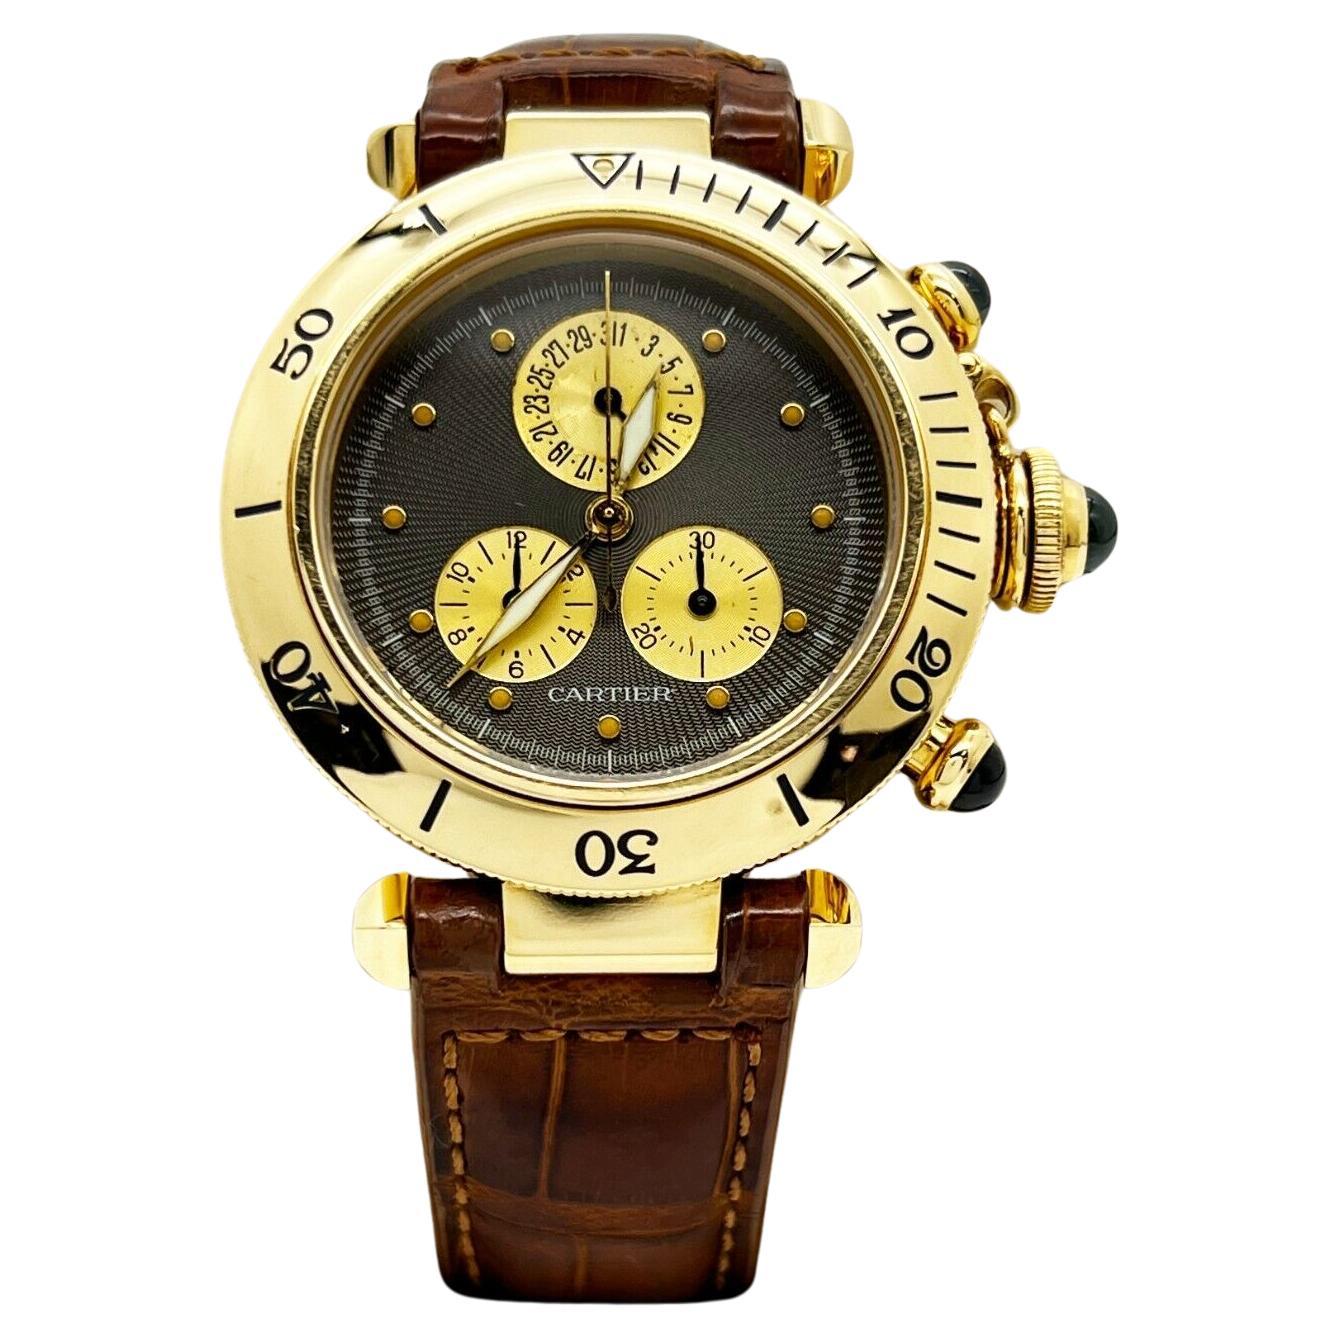 Cartier Pasha Ref 1353 Chronograph 18K Yellow Gold 35mm Leather Strap